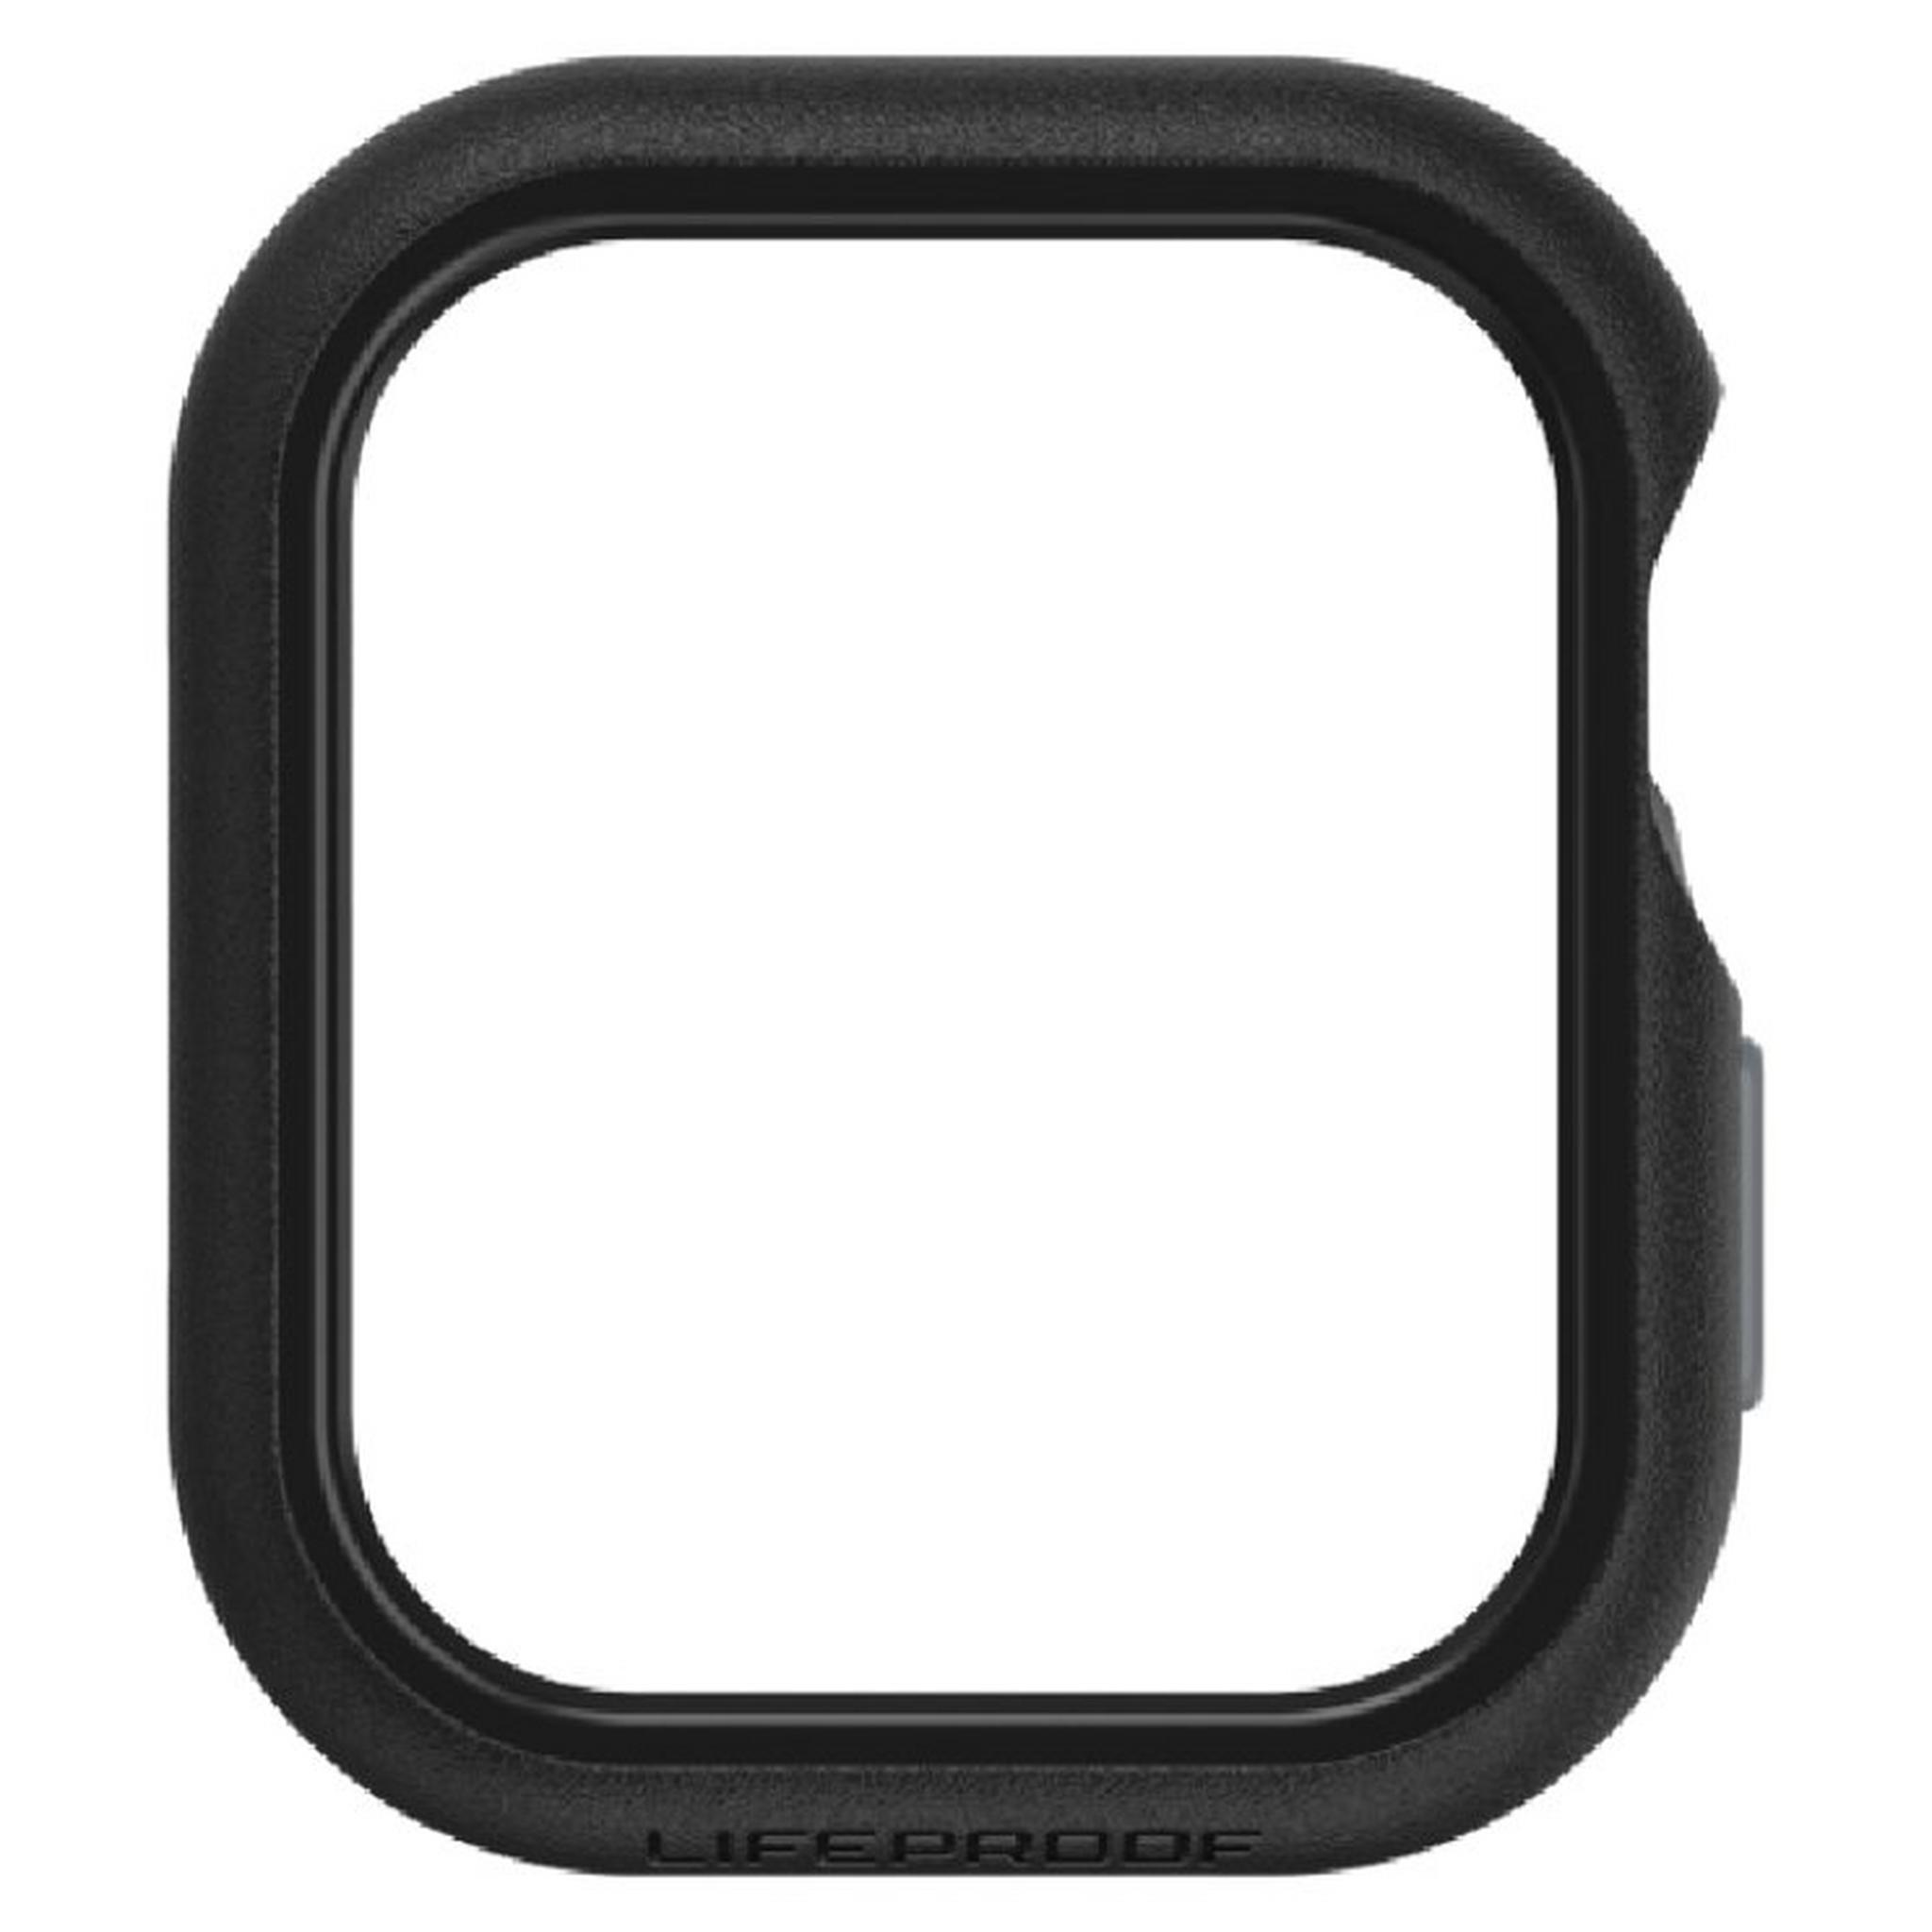 Lifeproof Case for Apple Watch 7/8 , 45MM, 77-87569 - Black